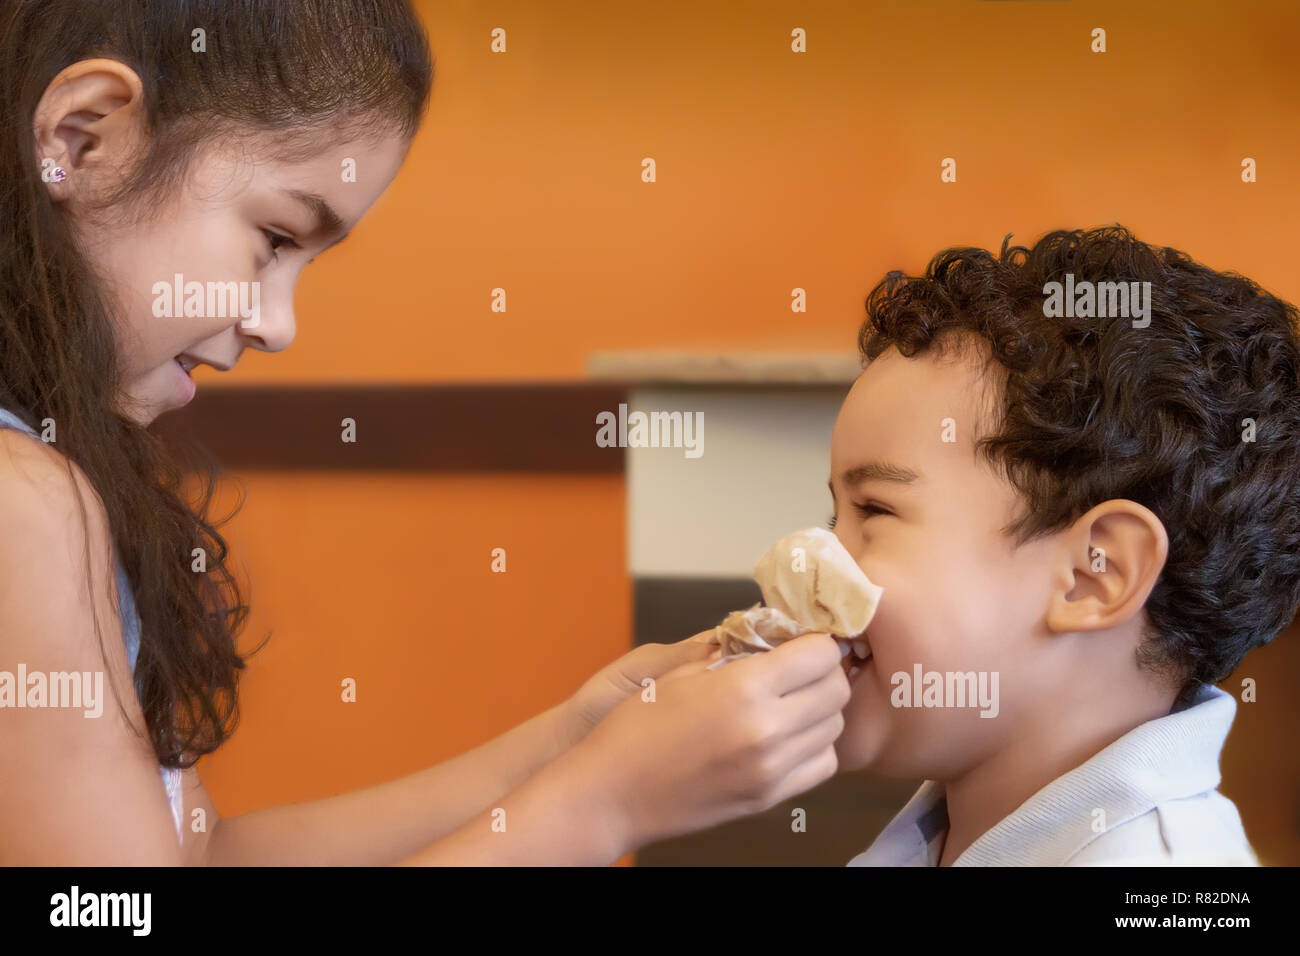 Big sister helps little brother blow his nose. Older sister focused on wiping younger brothers nose as he laughs. Stock Photo